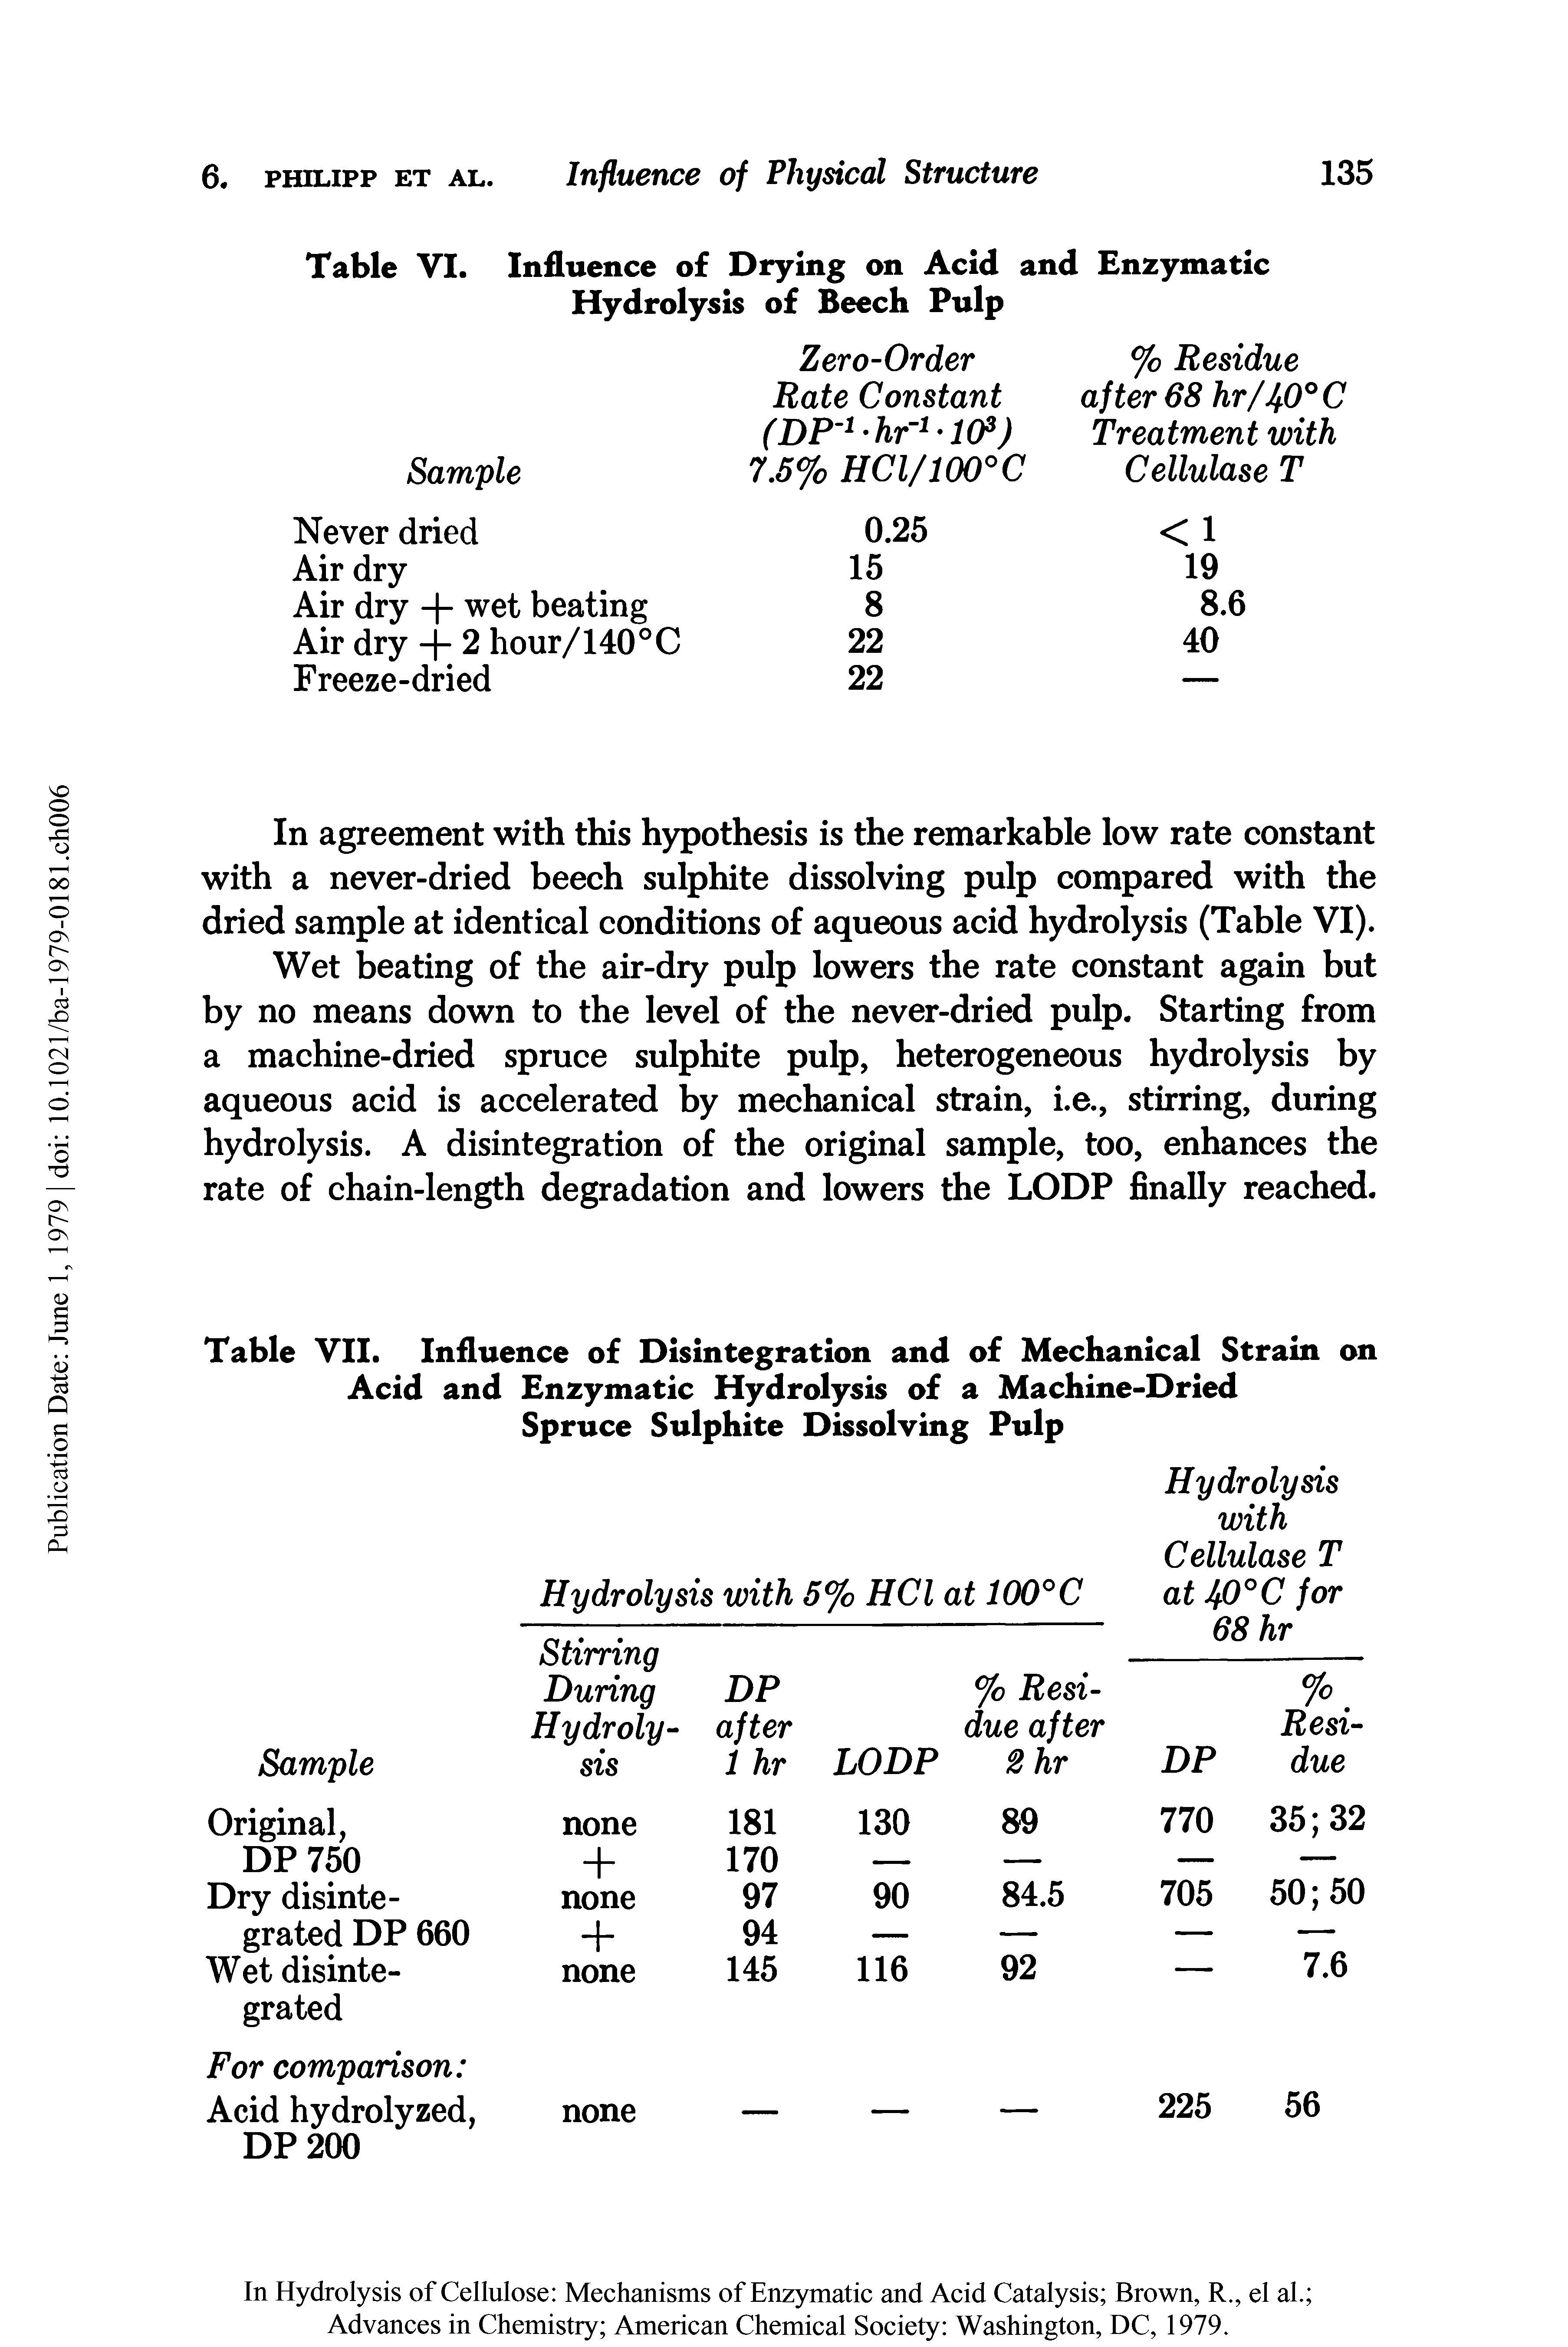 Table VII. Influence of Disintegration and of Mechanical Strain on Acid and Enzymatic Hydrolysis of a Machine-Dried Spruce Sulphite Dissolving Pulp...